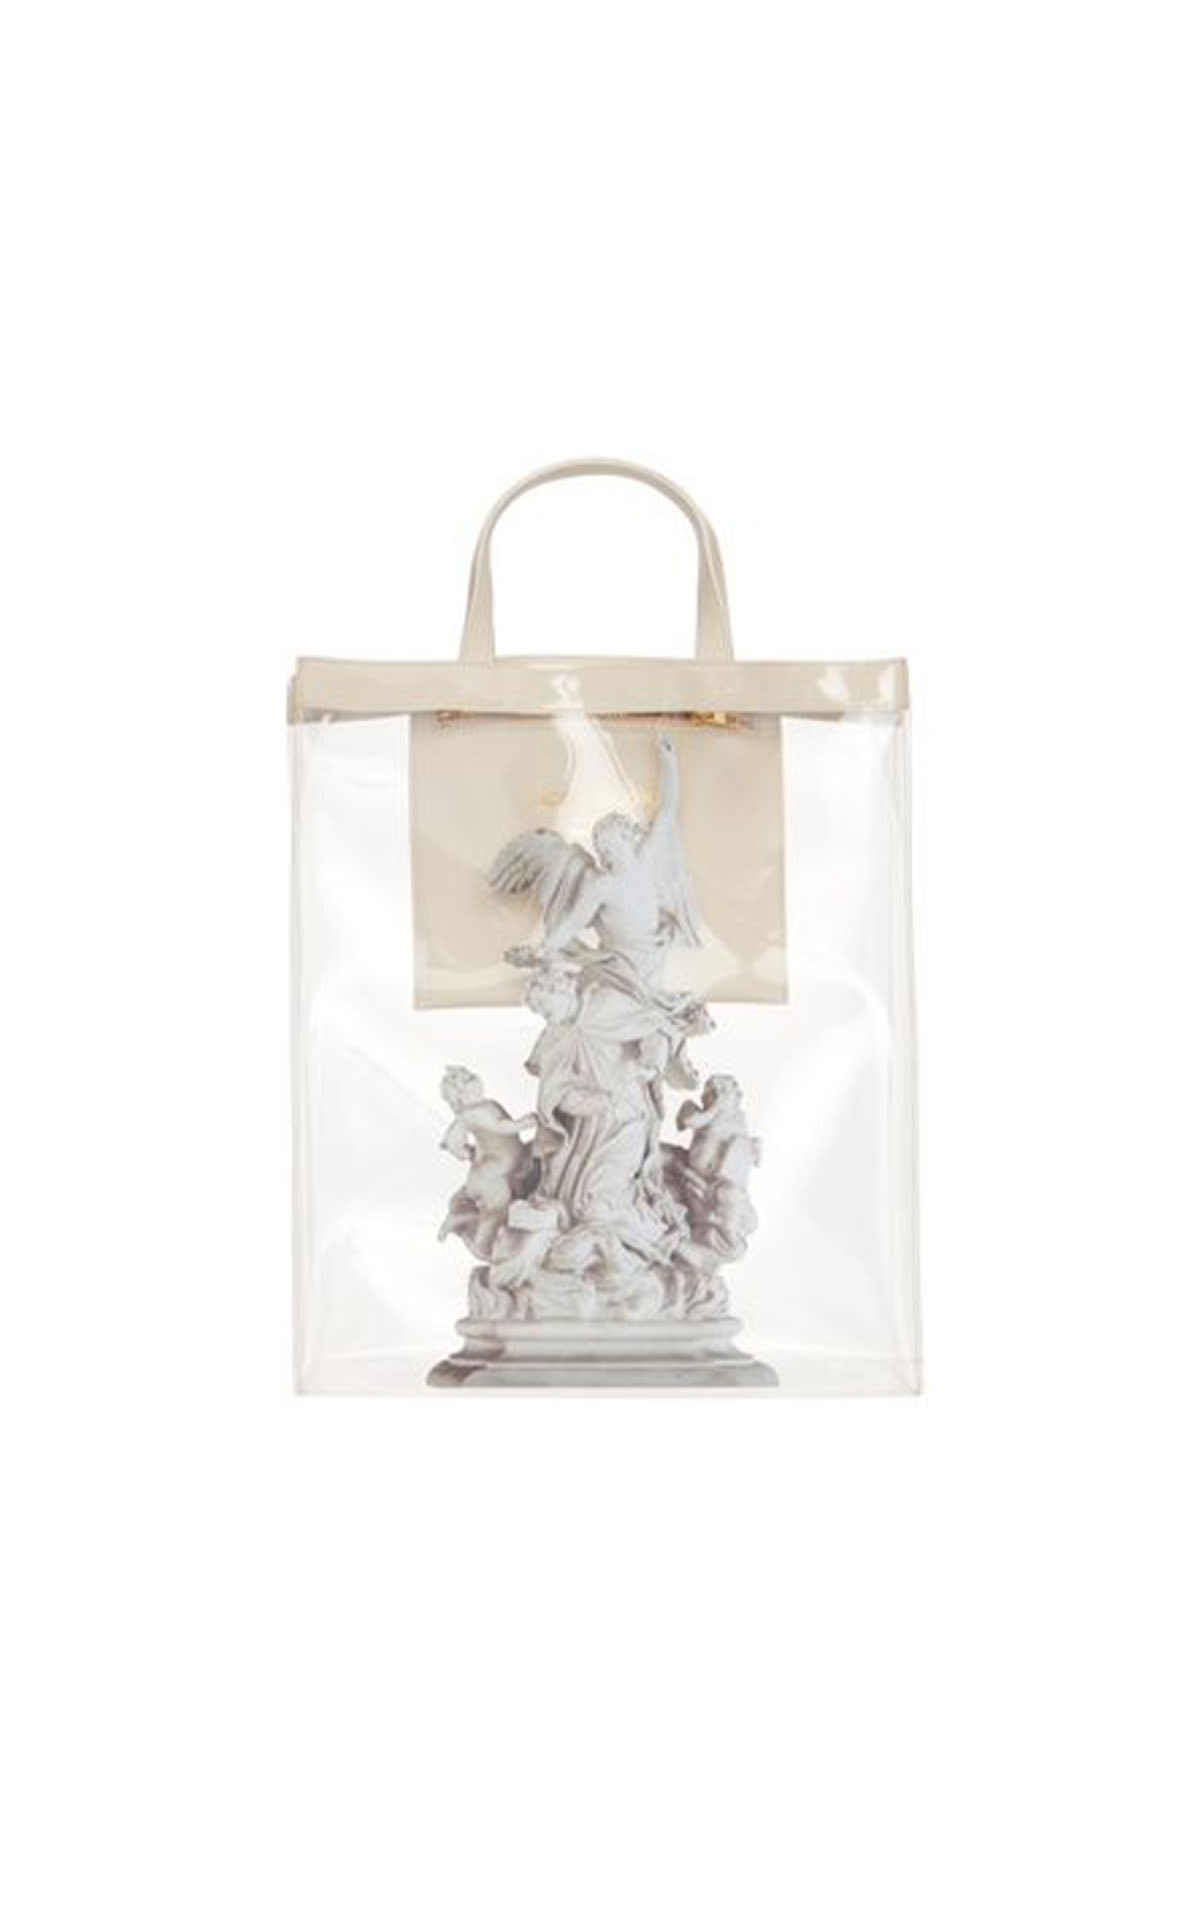 Acne Studios Transparent tote from Bicester Village